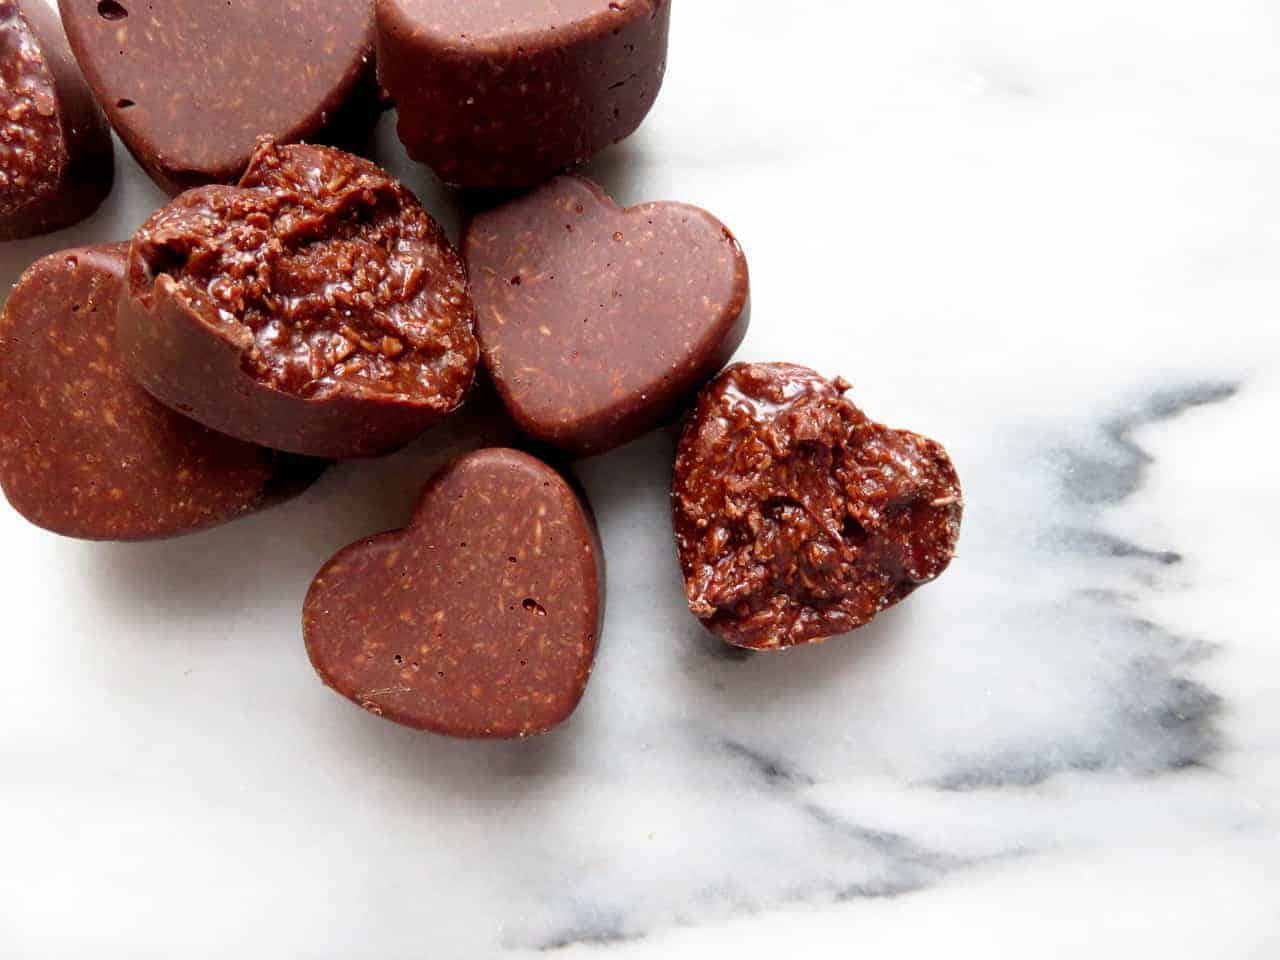 Chocolate Coconut Heart Candies